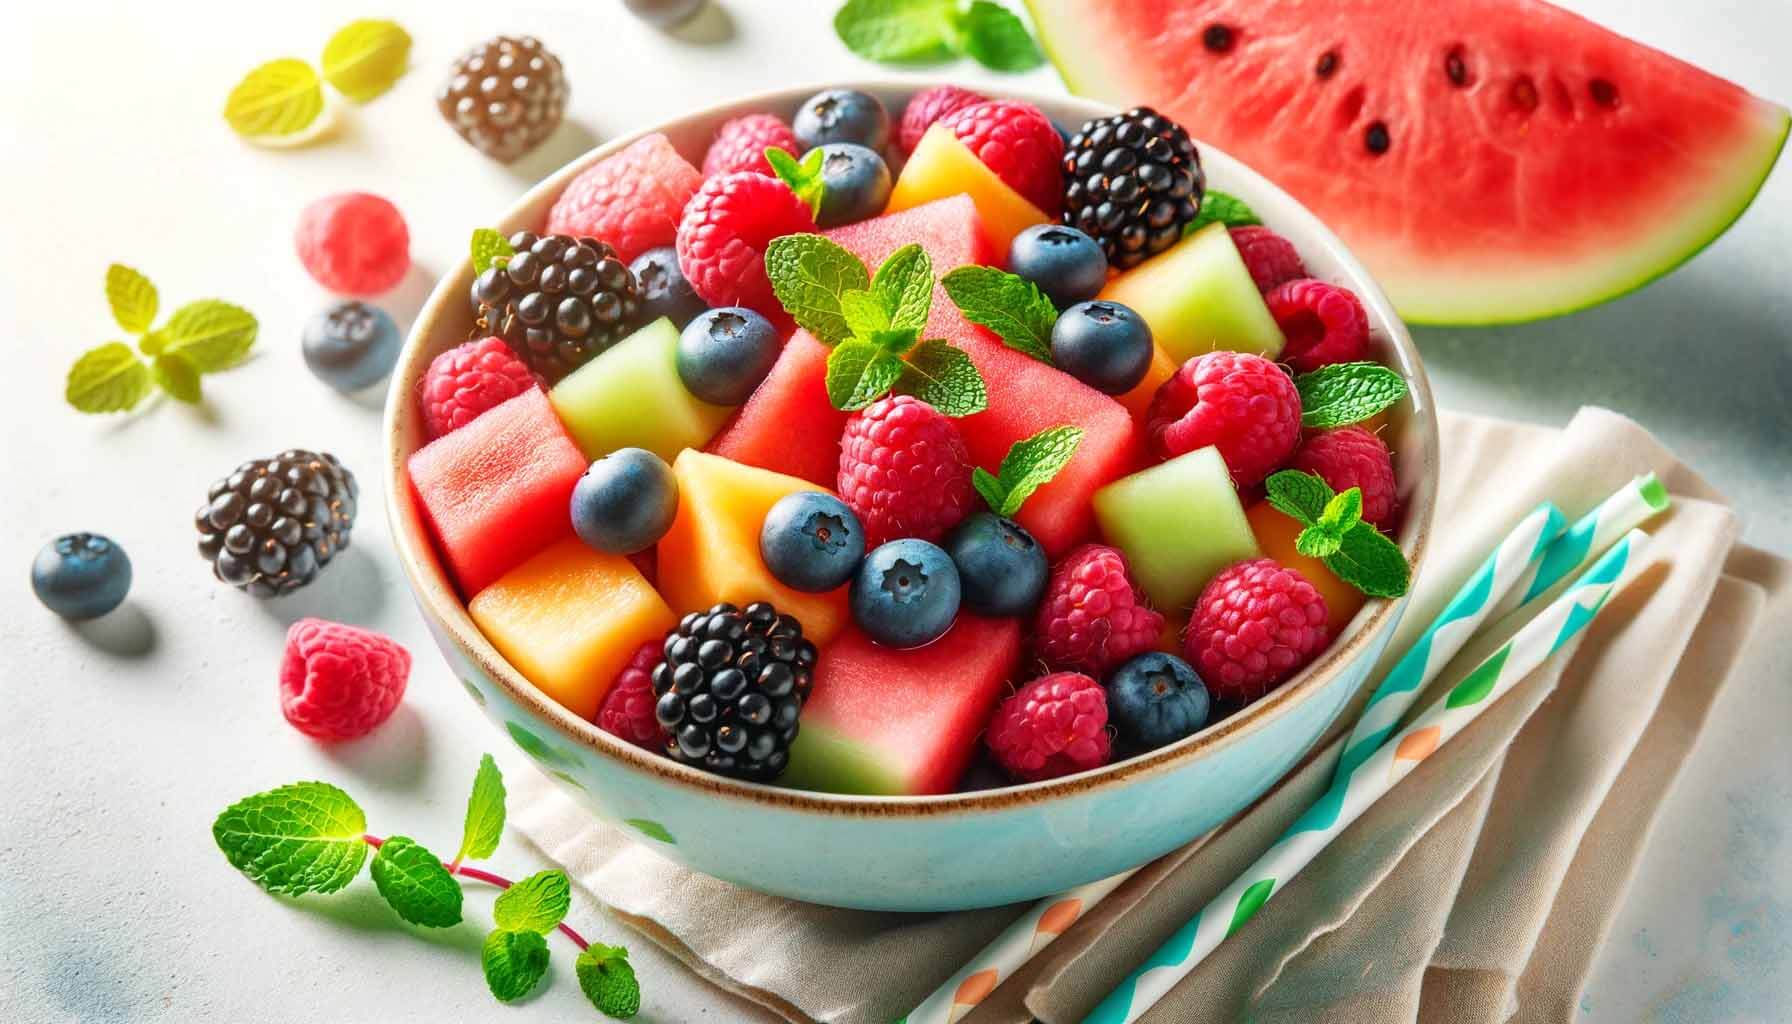 What is the best fruit to eat every day